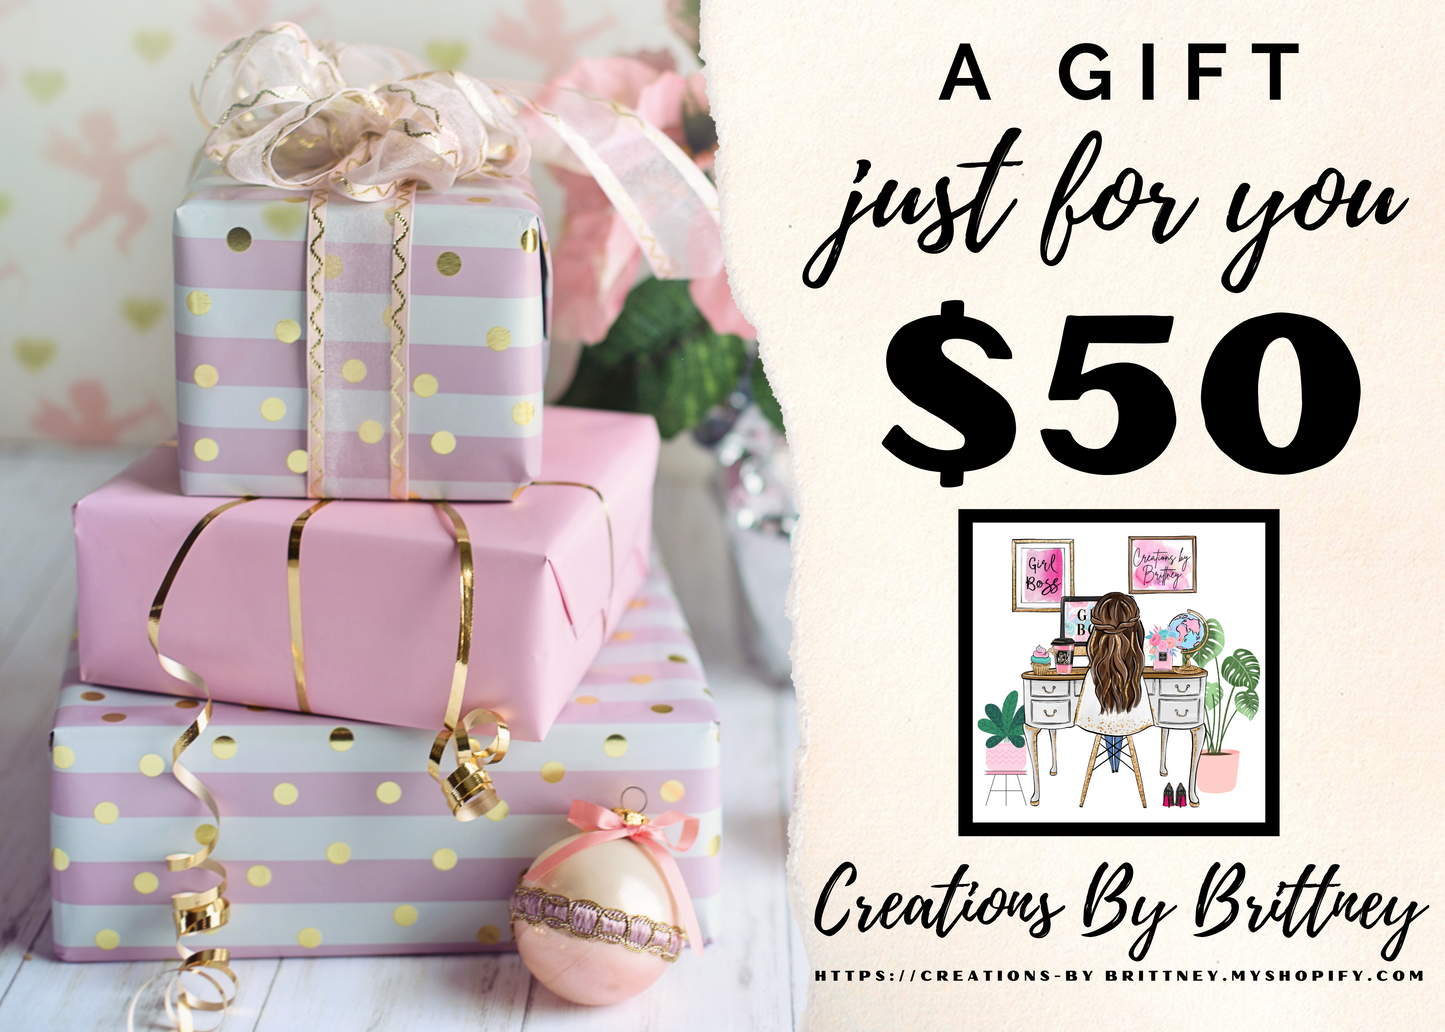 Digital Gift Cards - Creations By Brittney